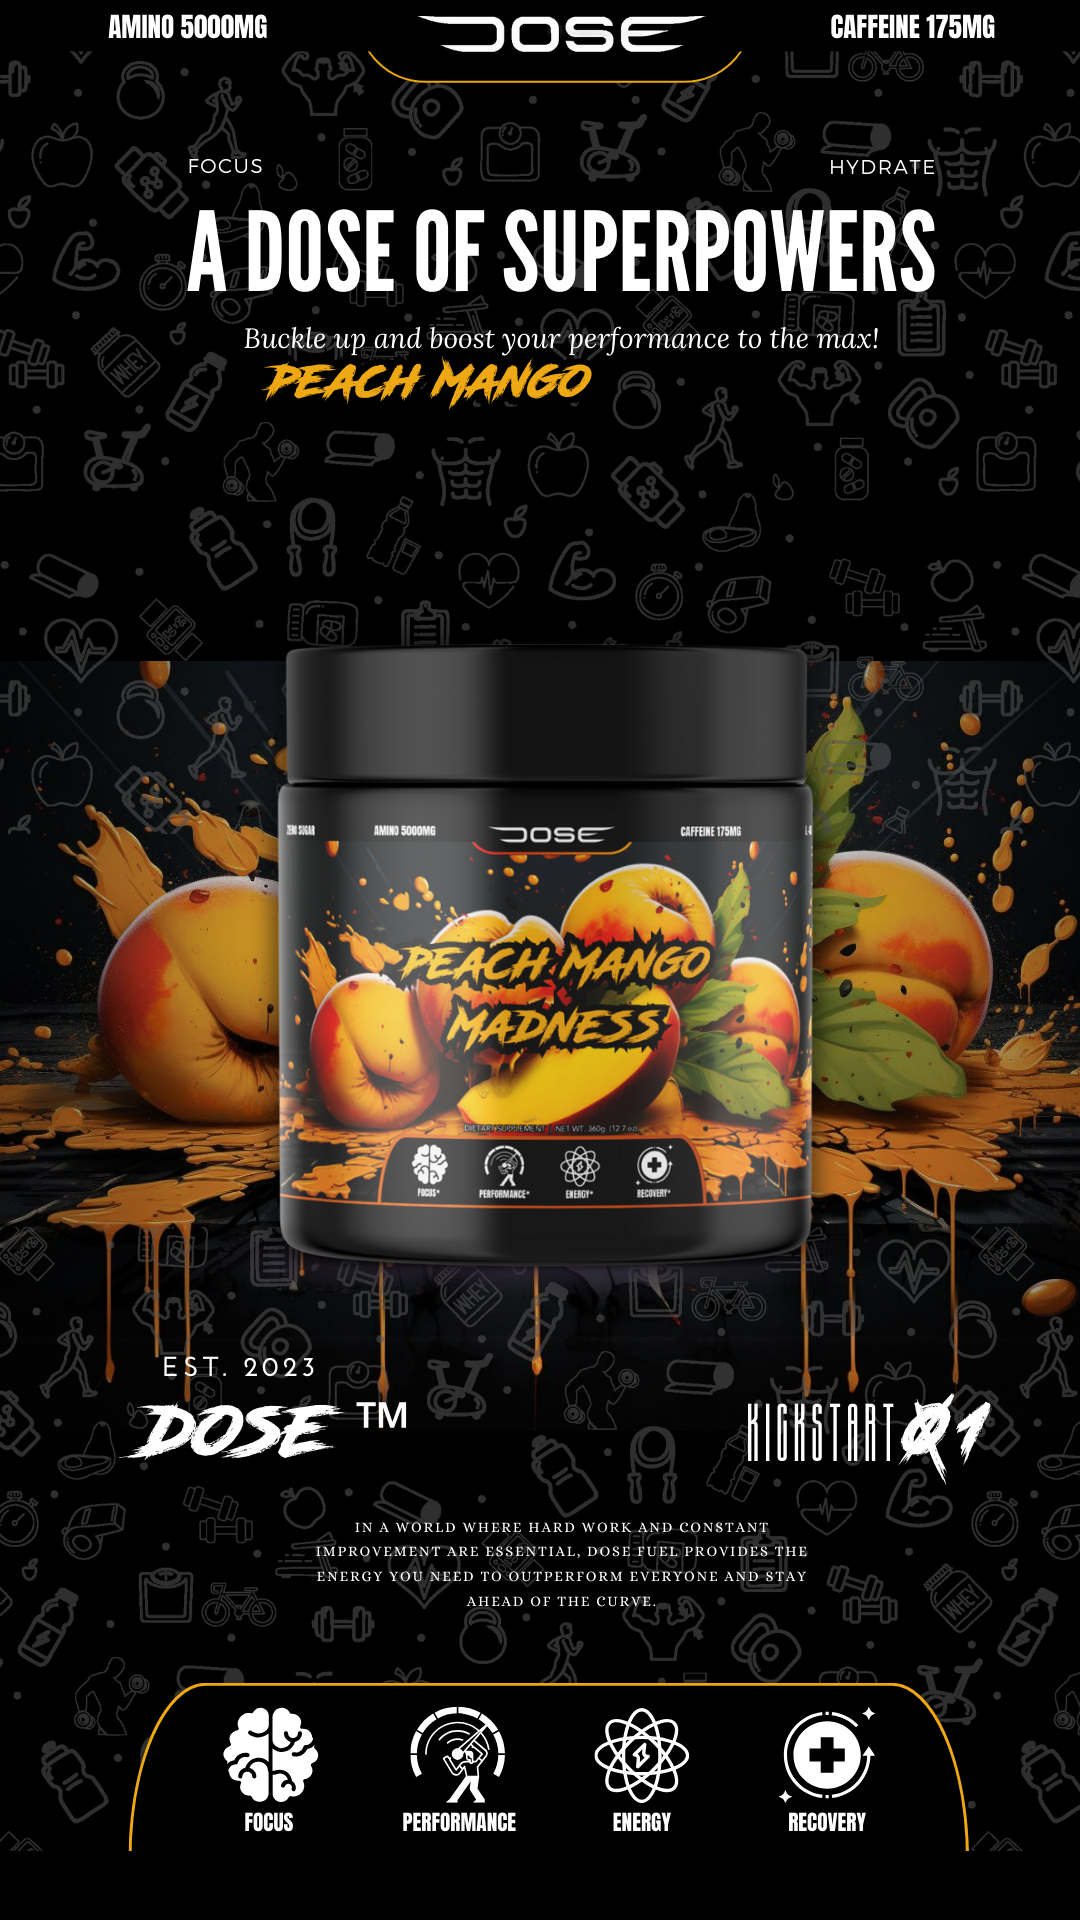 Dose Fuel Peach Mango Madness Pre-Workout Supplement - A Dose of Superpowers, 5000mg Amino Blend, 175mg Caffeine, Boost Performance, Focus, Energy, and Recovery